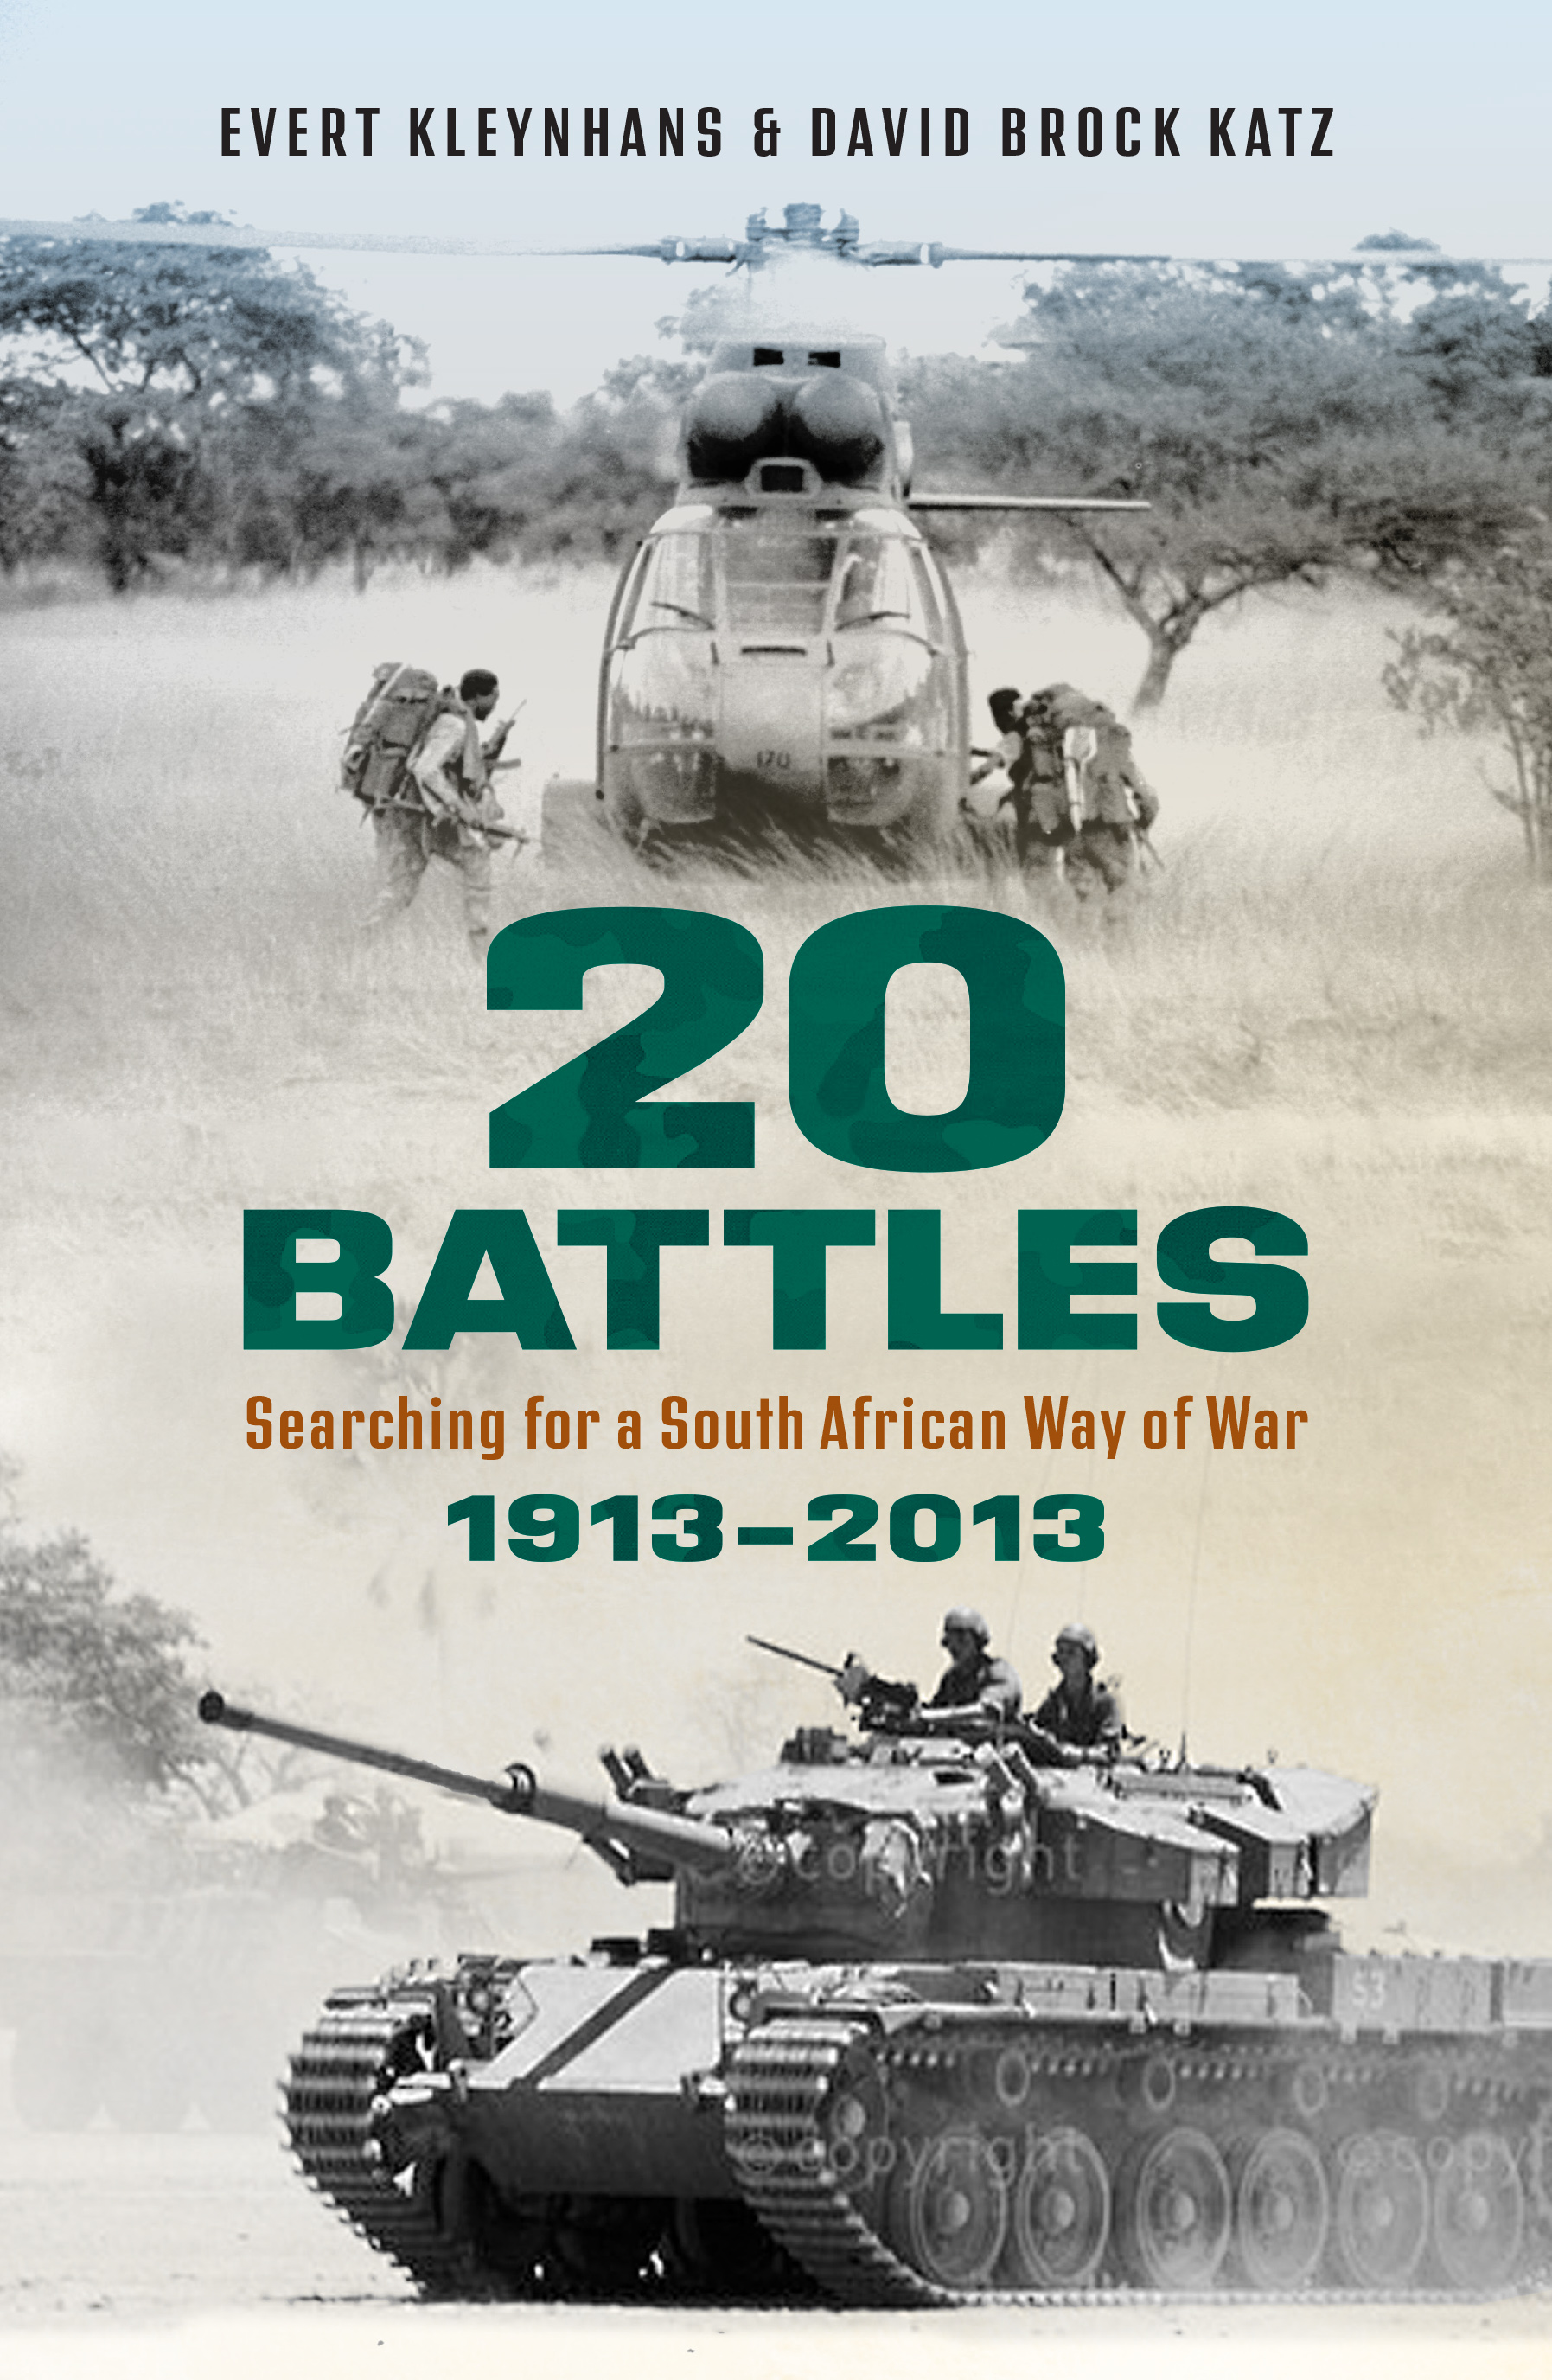 Searching for a South African Way of War  (1913-2013) 